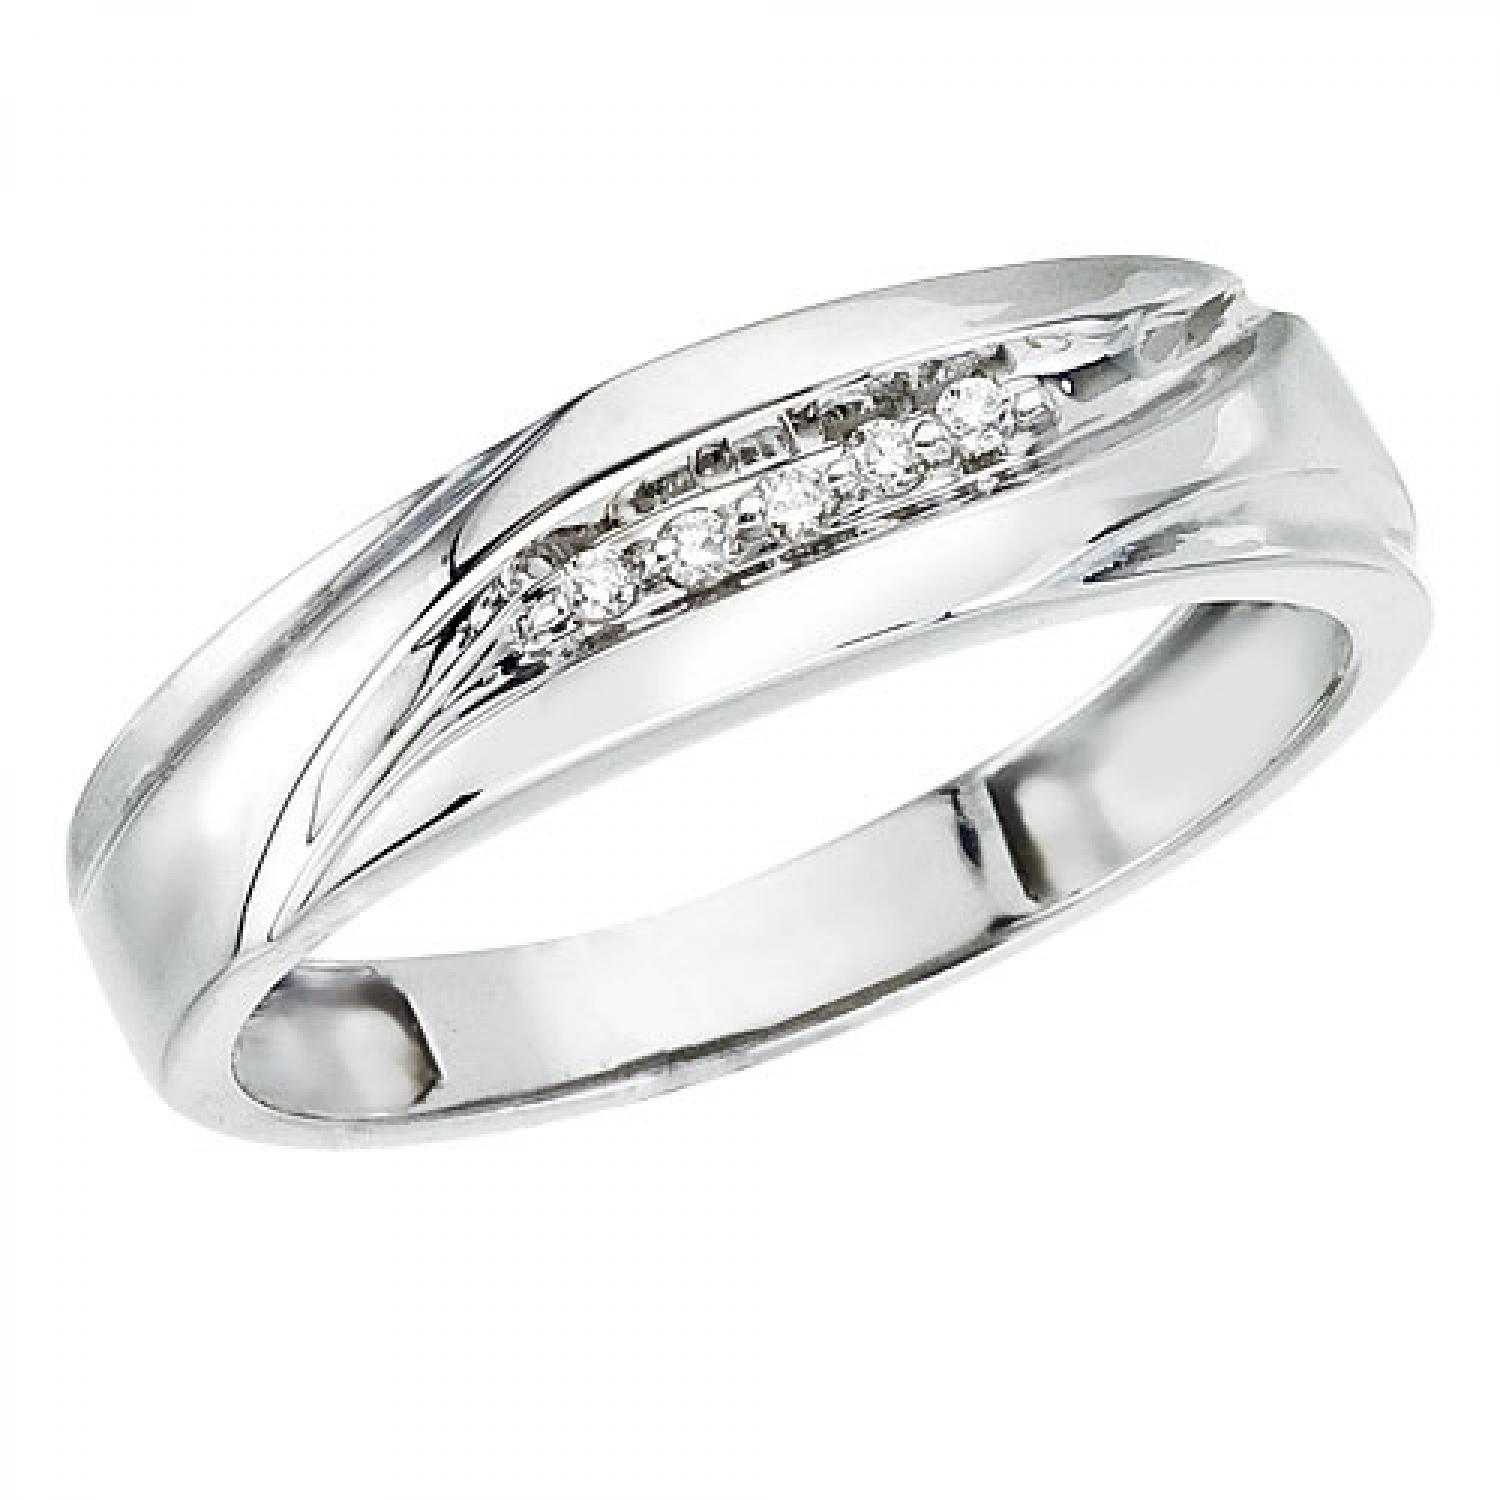 14K White Gold Gents Qpid Matching Bridal Ring Band